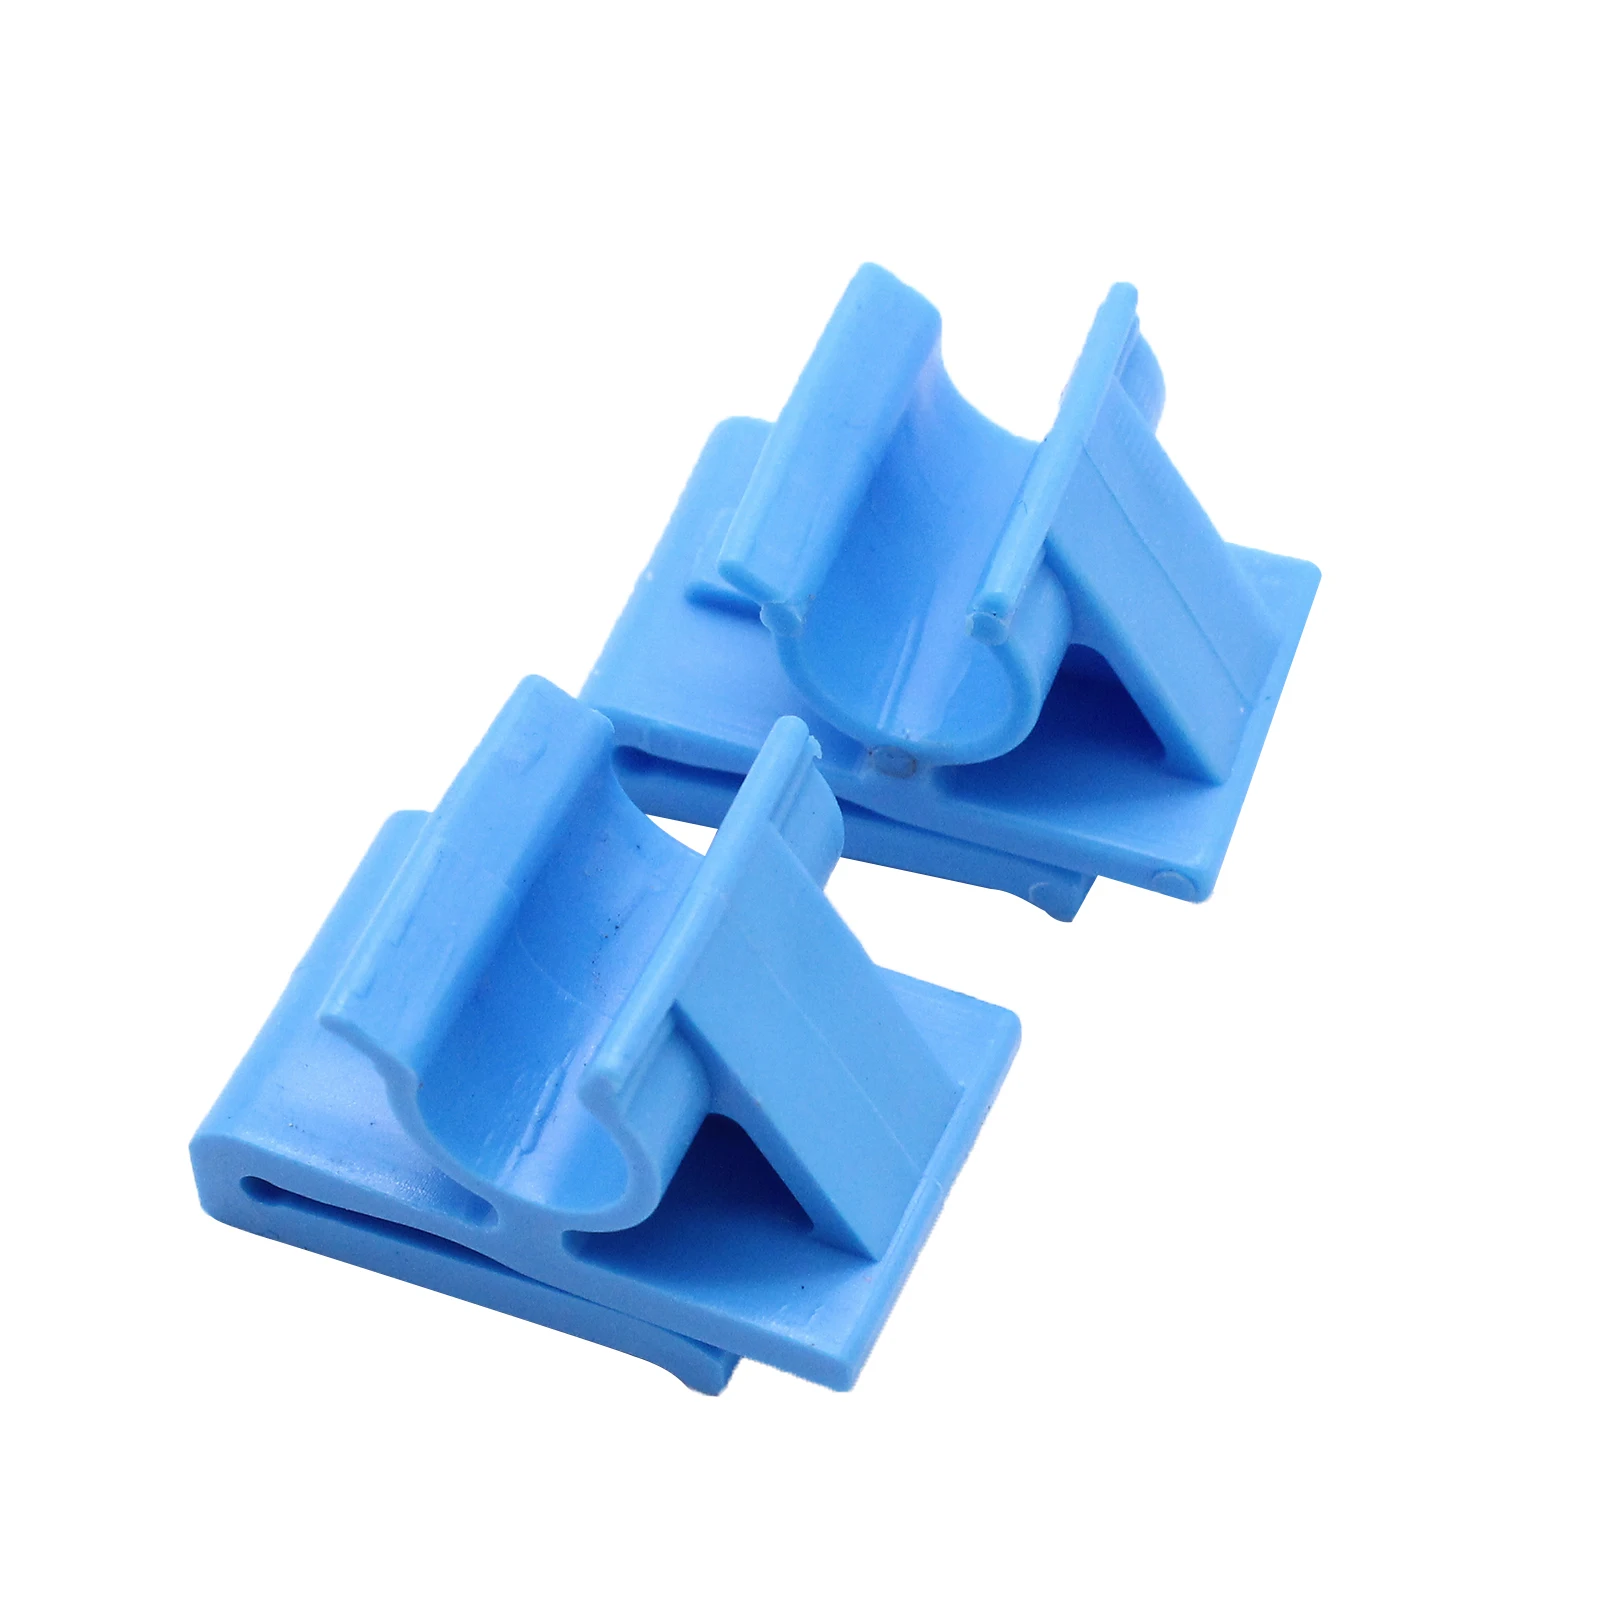 2x Blue Lower Glove Box Clips 92189069 Fix Parts 92201416 Fit for Holden VY WK Car WL